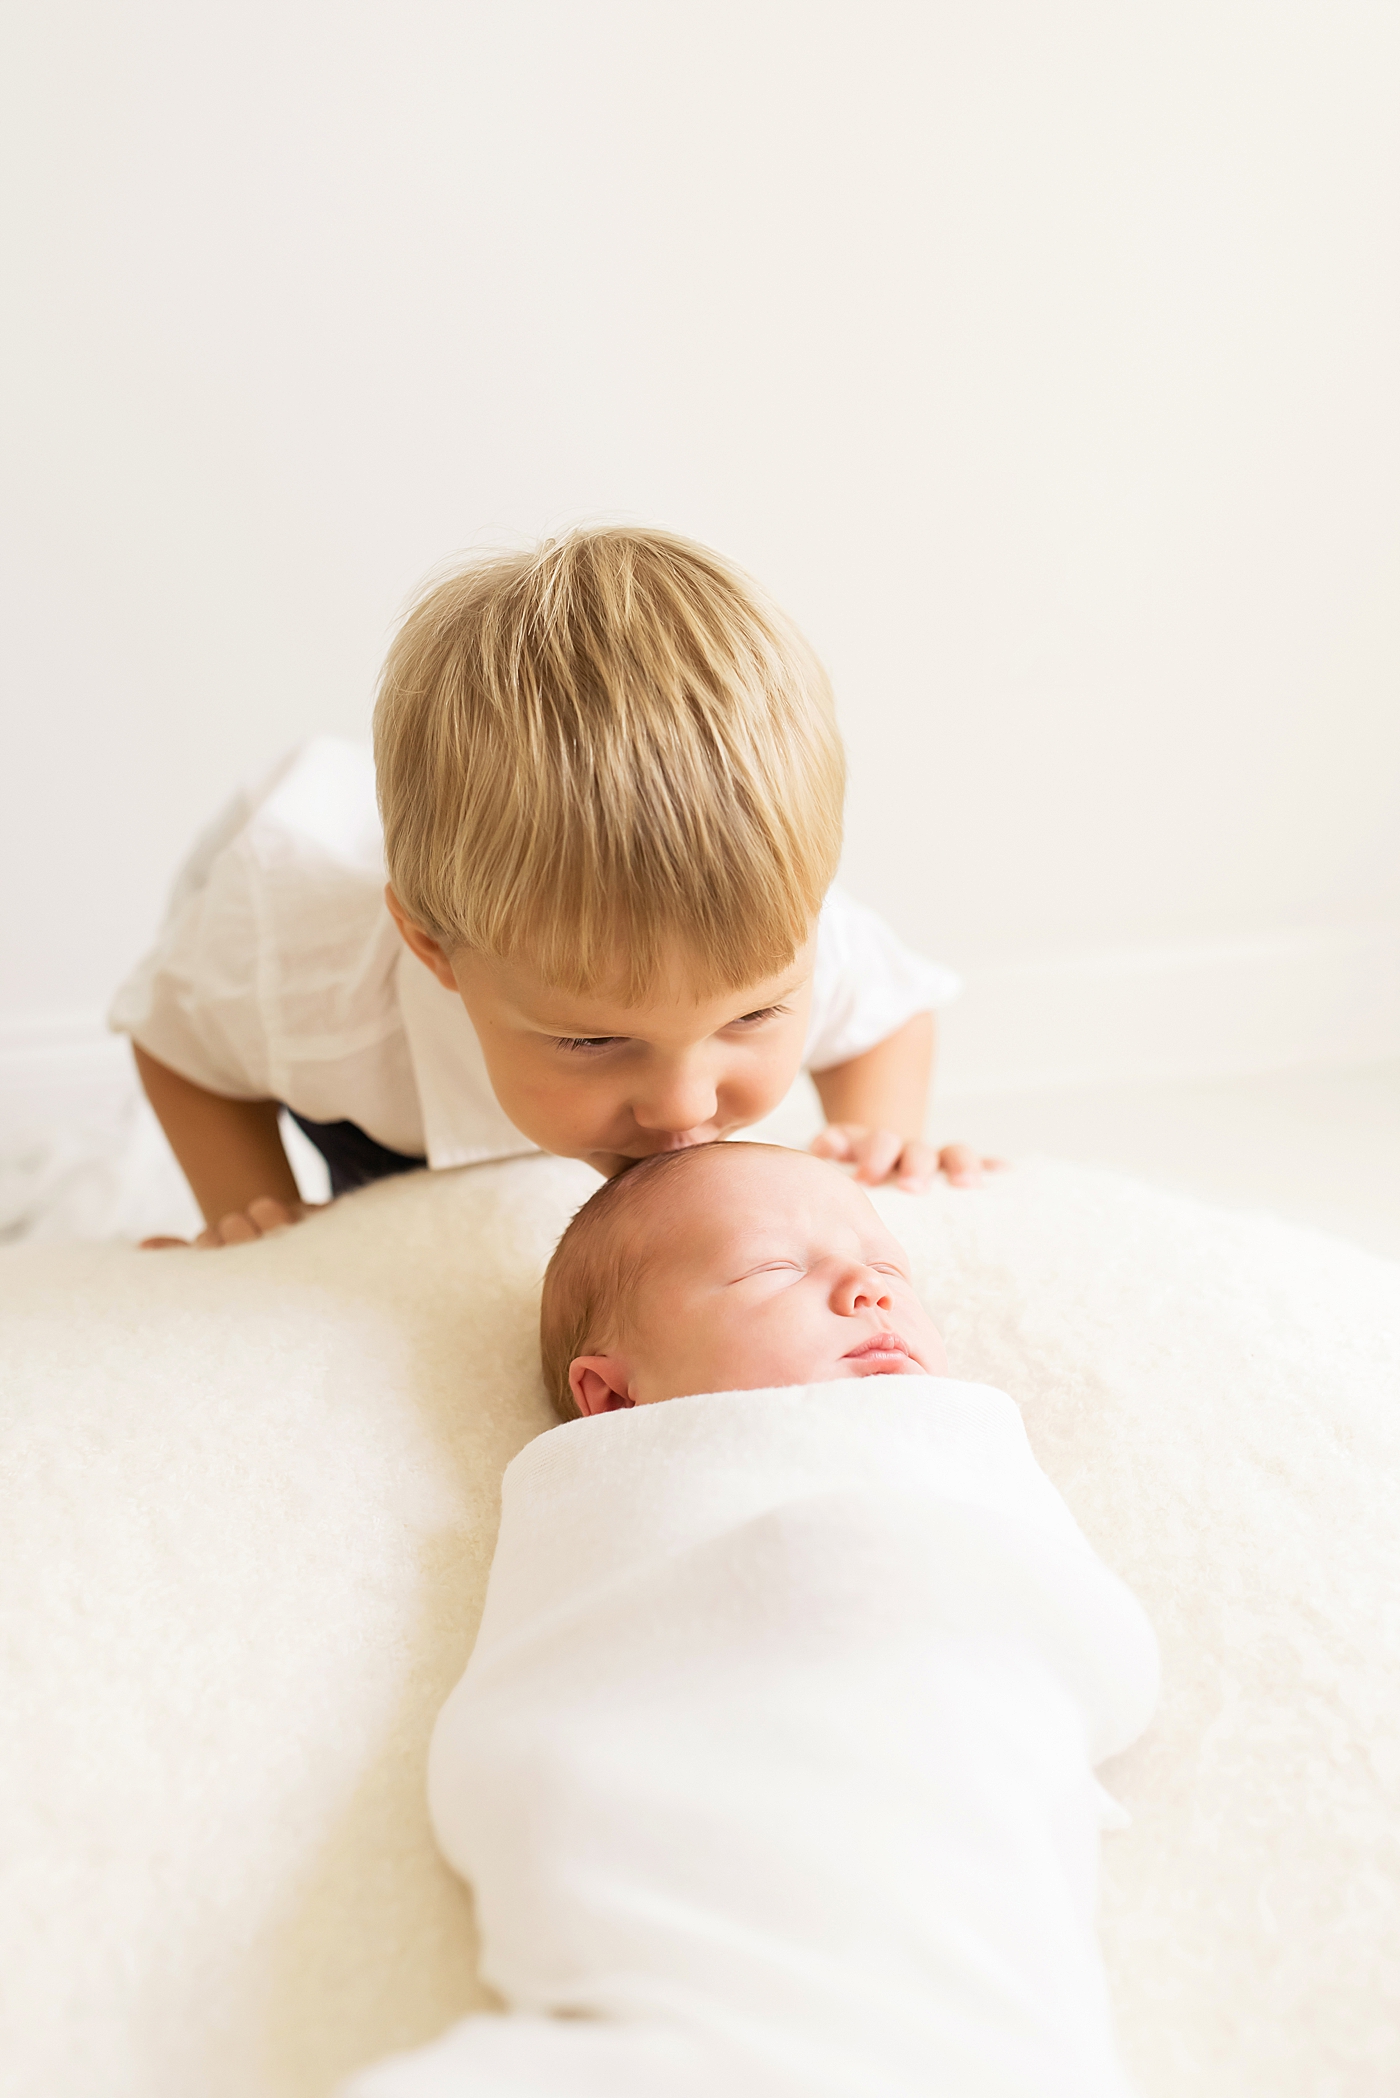 Big brother kissing newborn baby brother on the head | Photo by Anna Wisjo Photography 